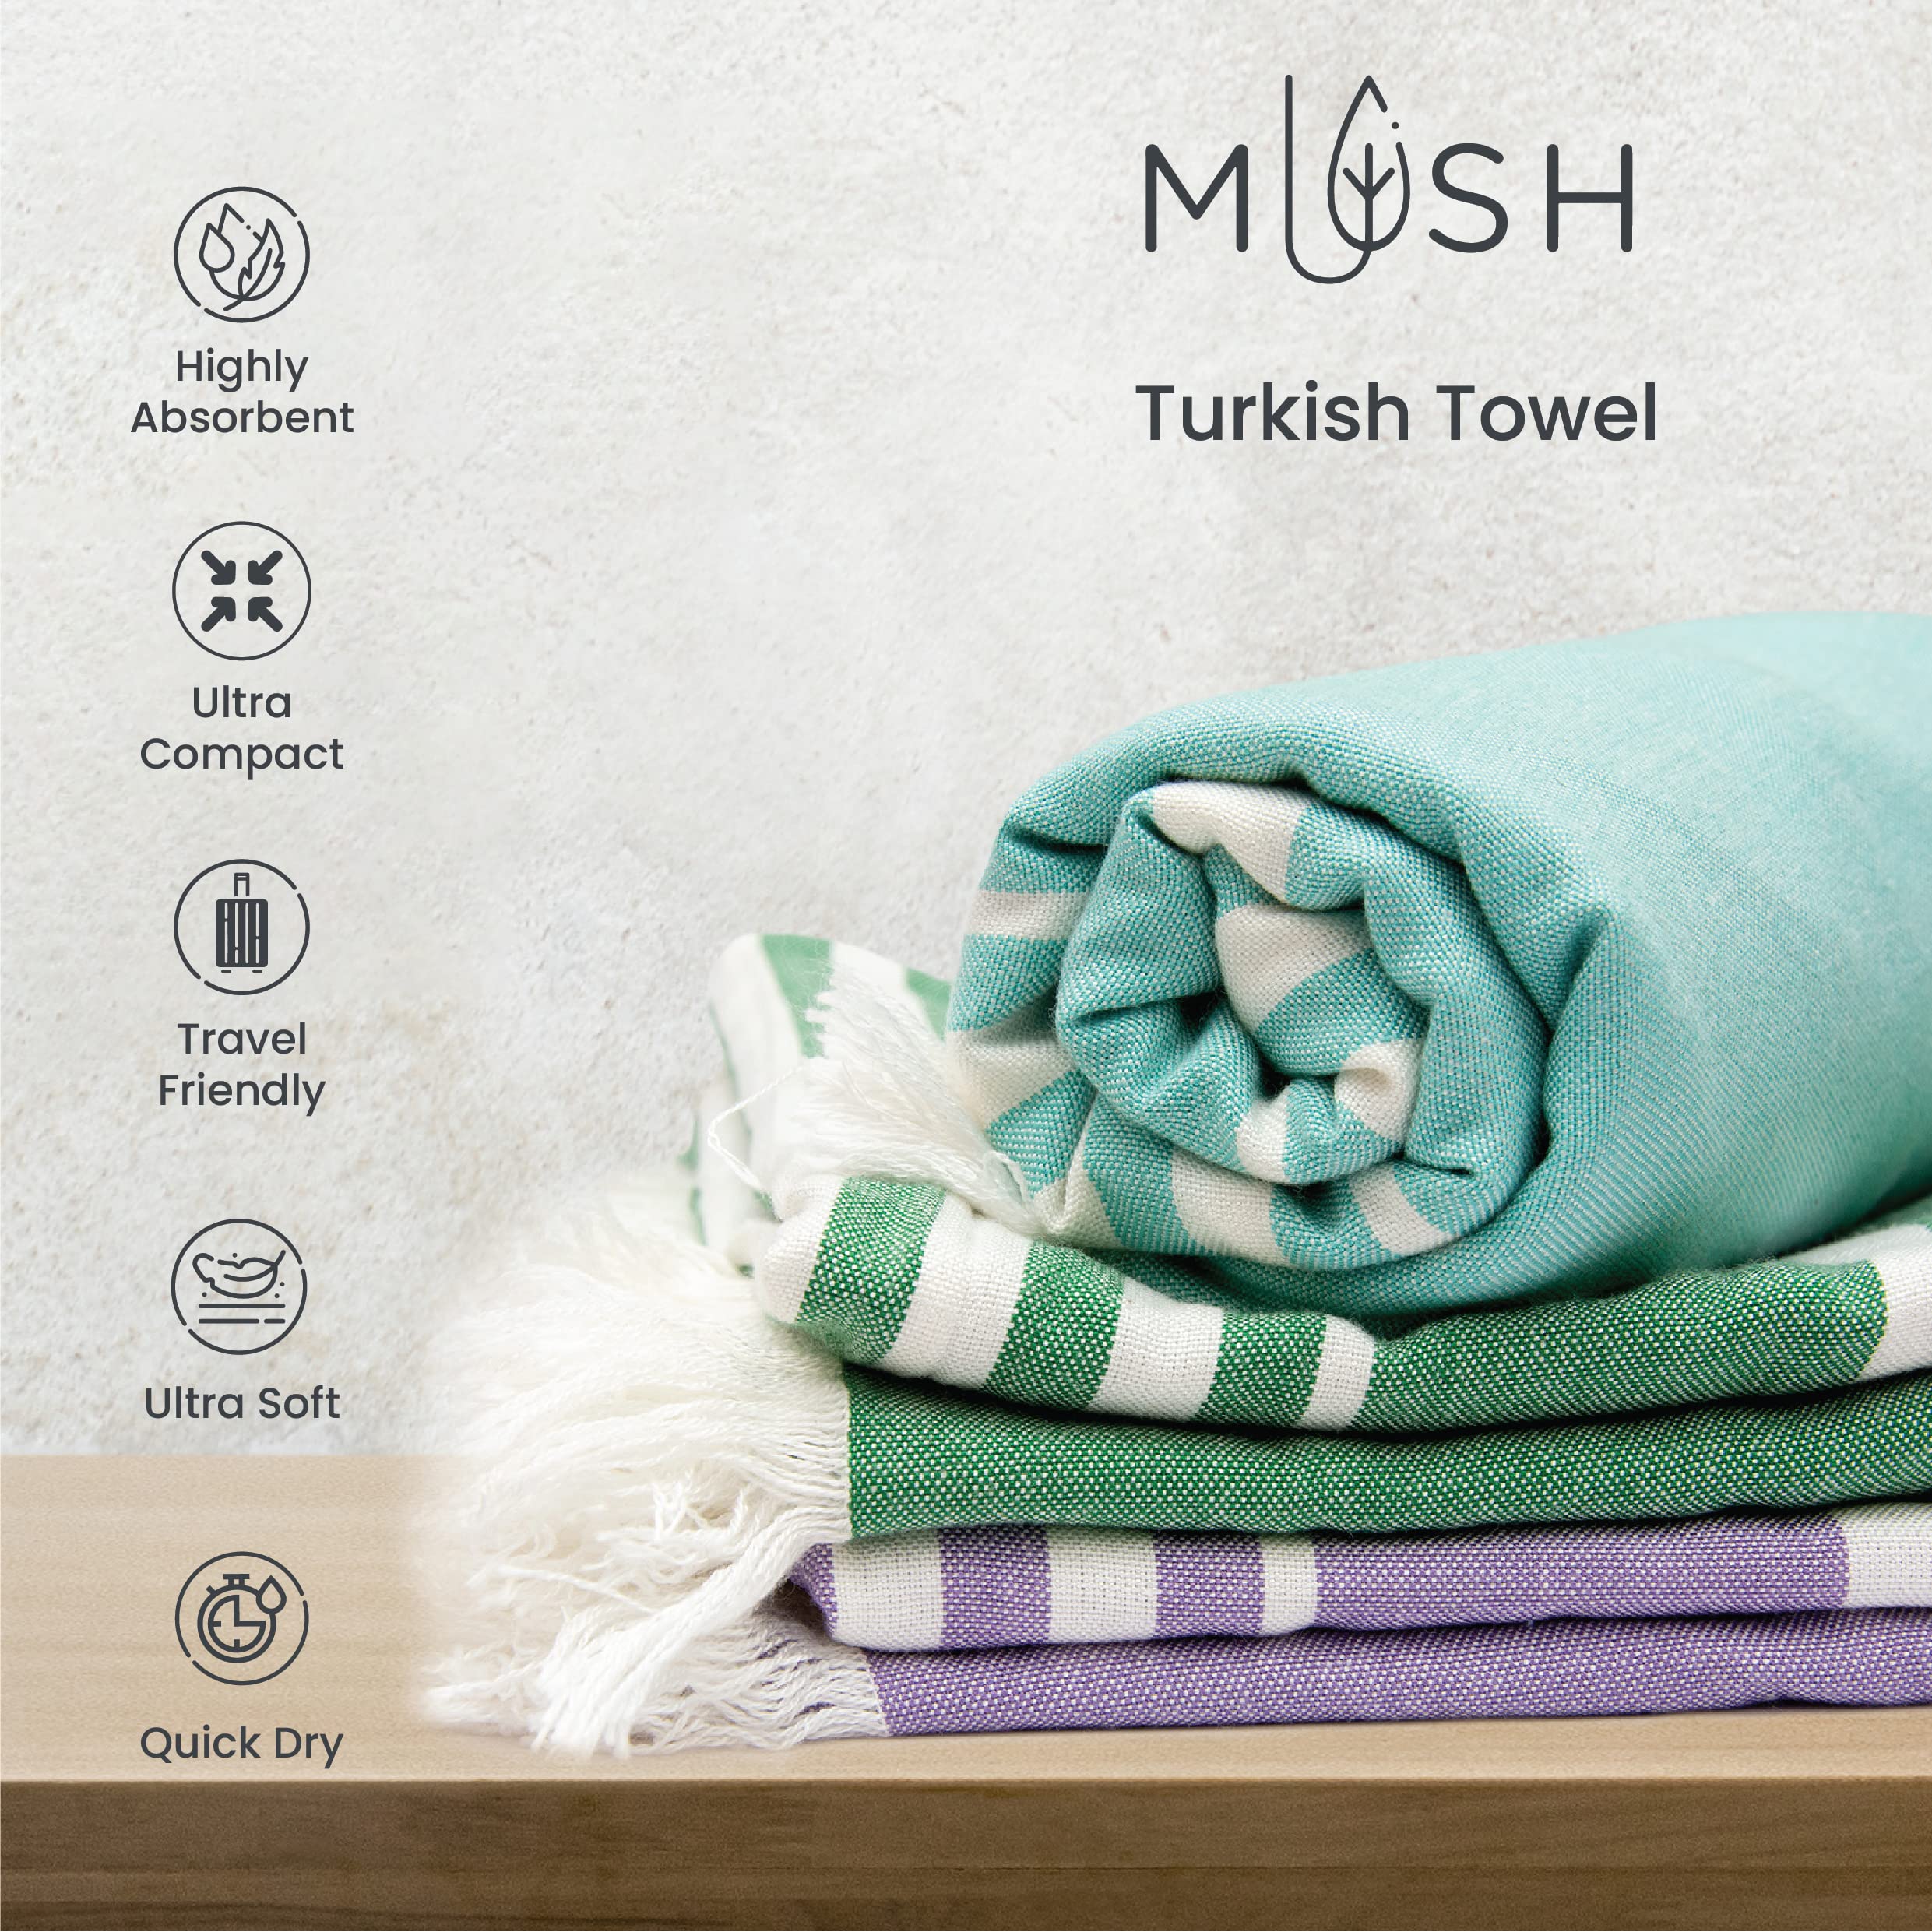 Mush 100% Bamboo Large Bath Towel | Ultra Soft, Absorbent, Light Weight, & Quick Dry Towel for Bath, Travel, Gym, Beach, Pool, and Yoga | 29 x 59 Inches